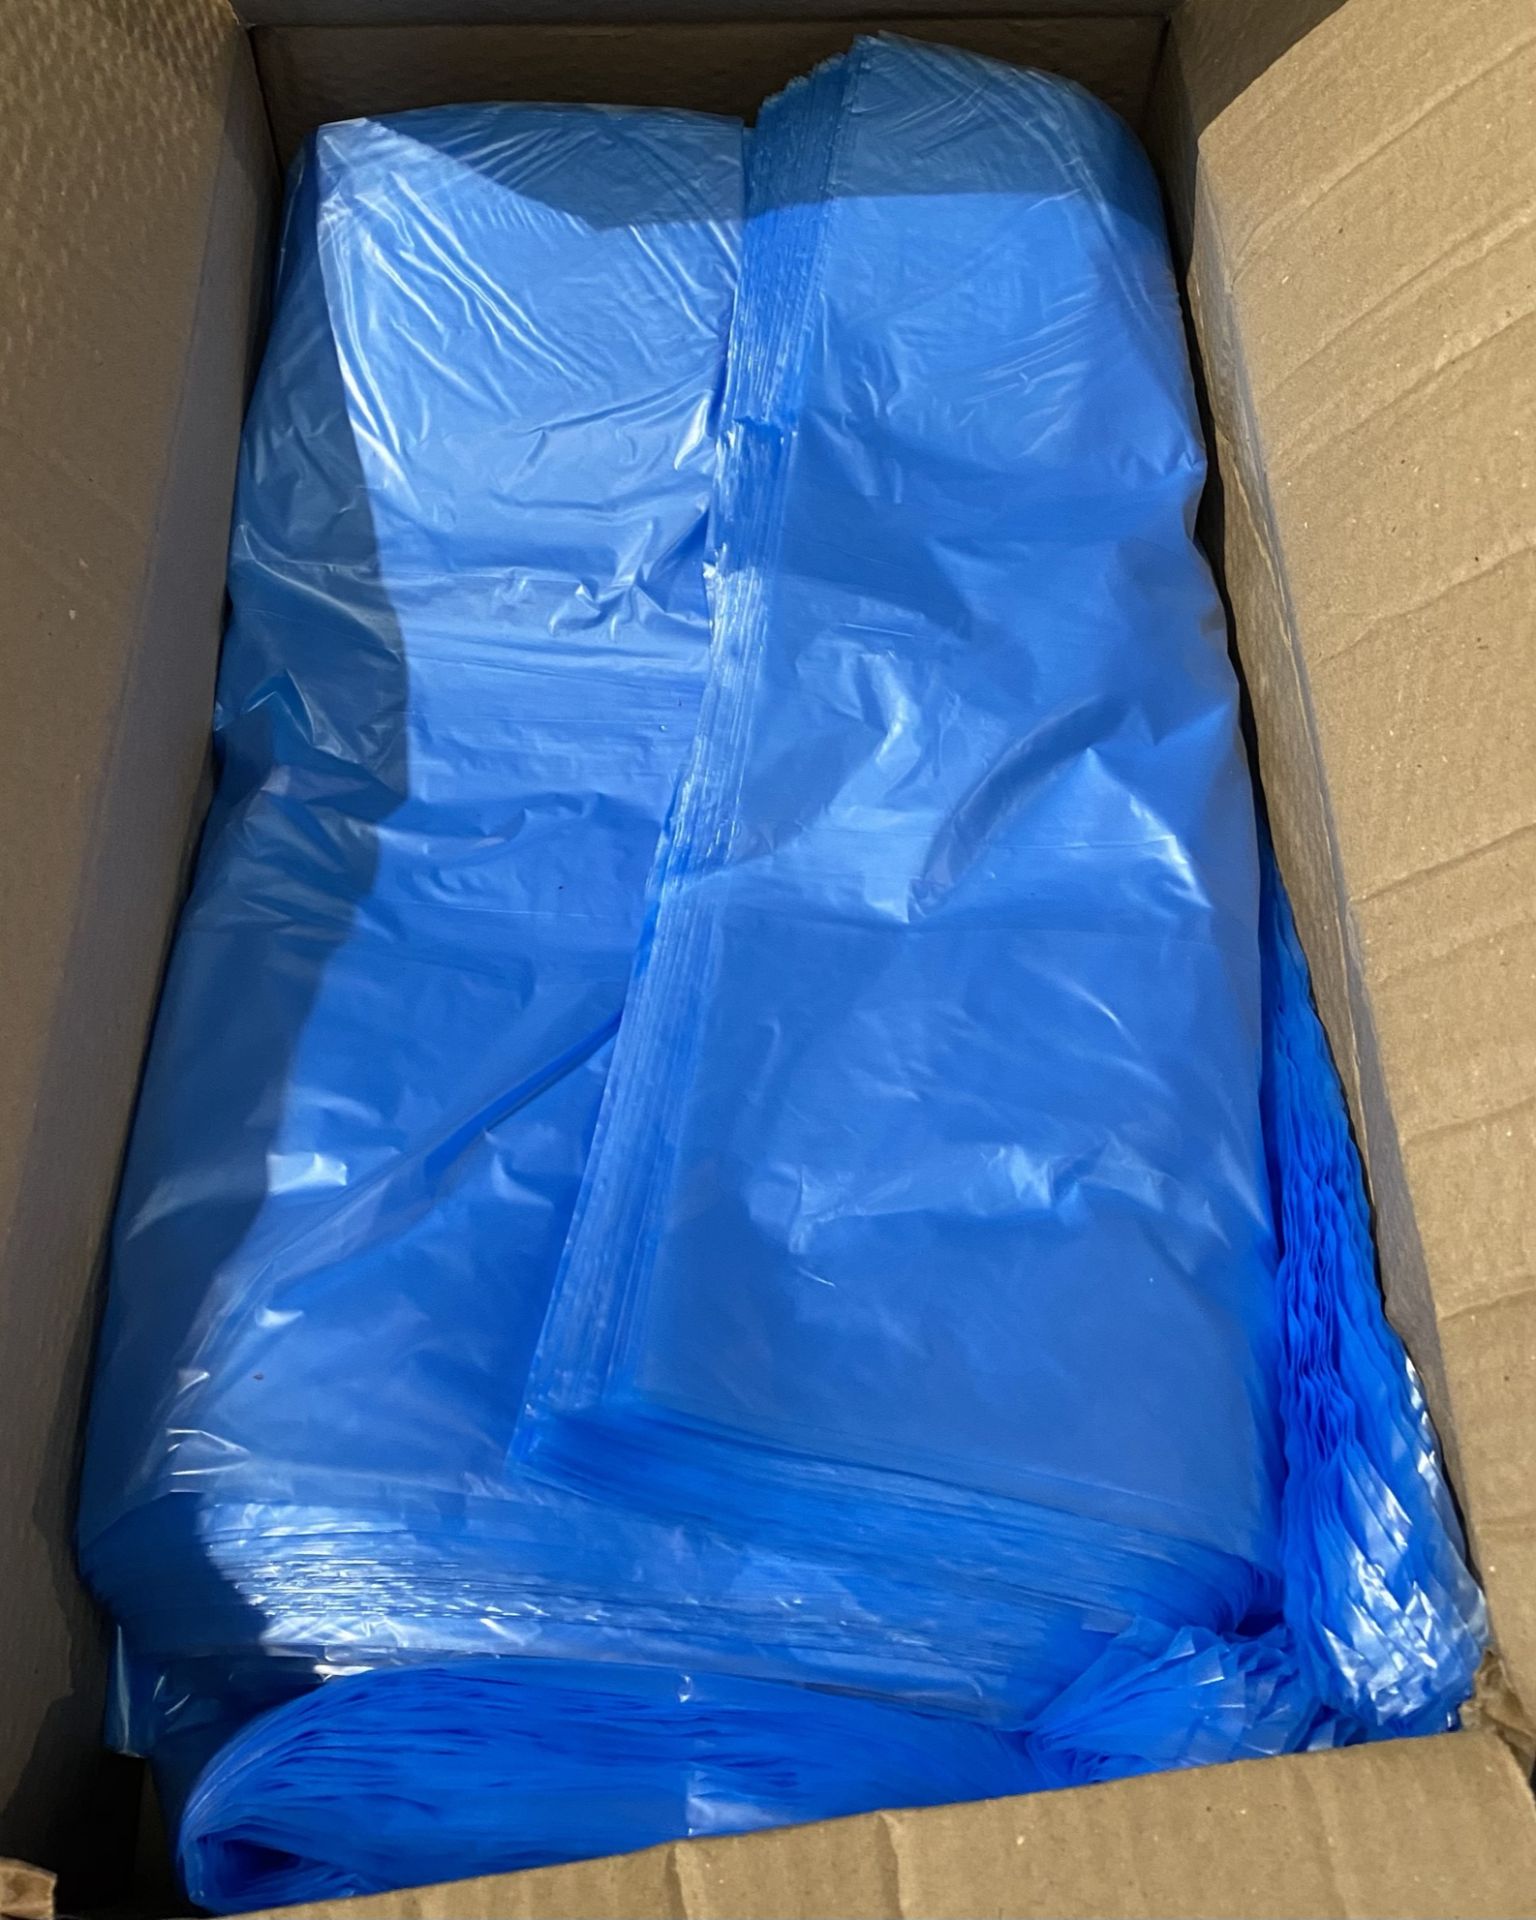 7½ x Boxes of 1,000 x blue tint catering box lining plastic bags. - Image 2 of 4